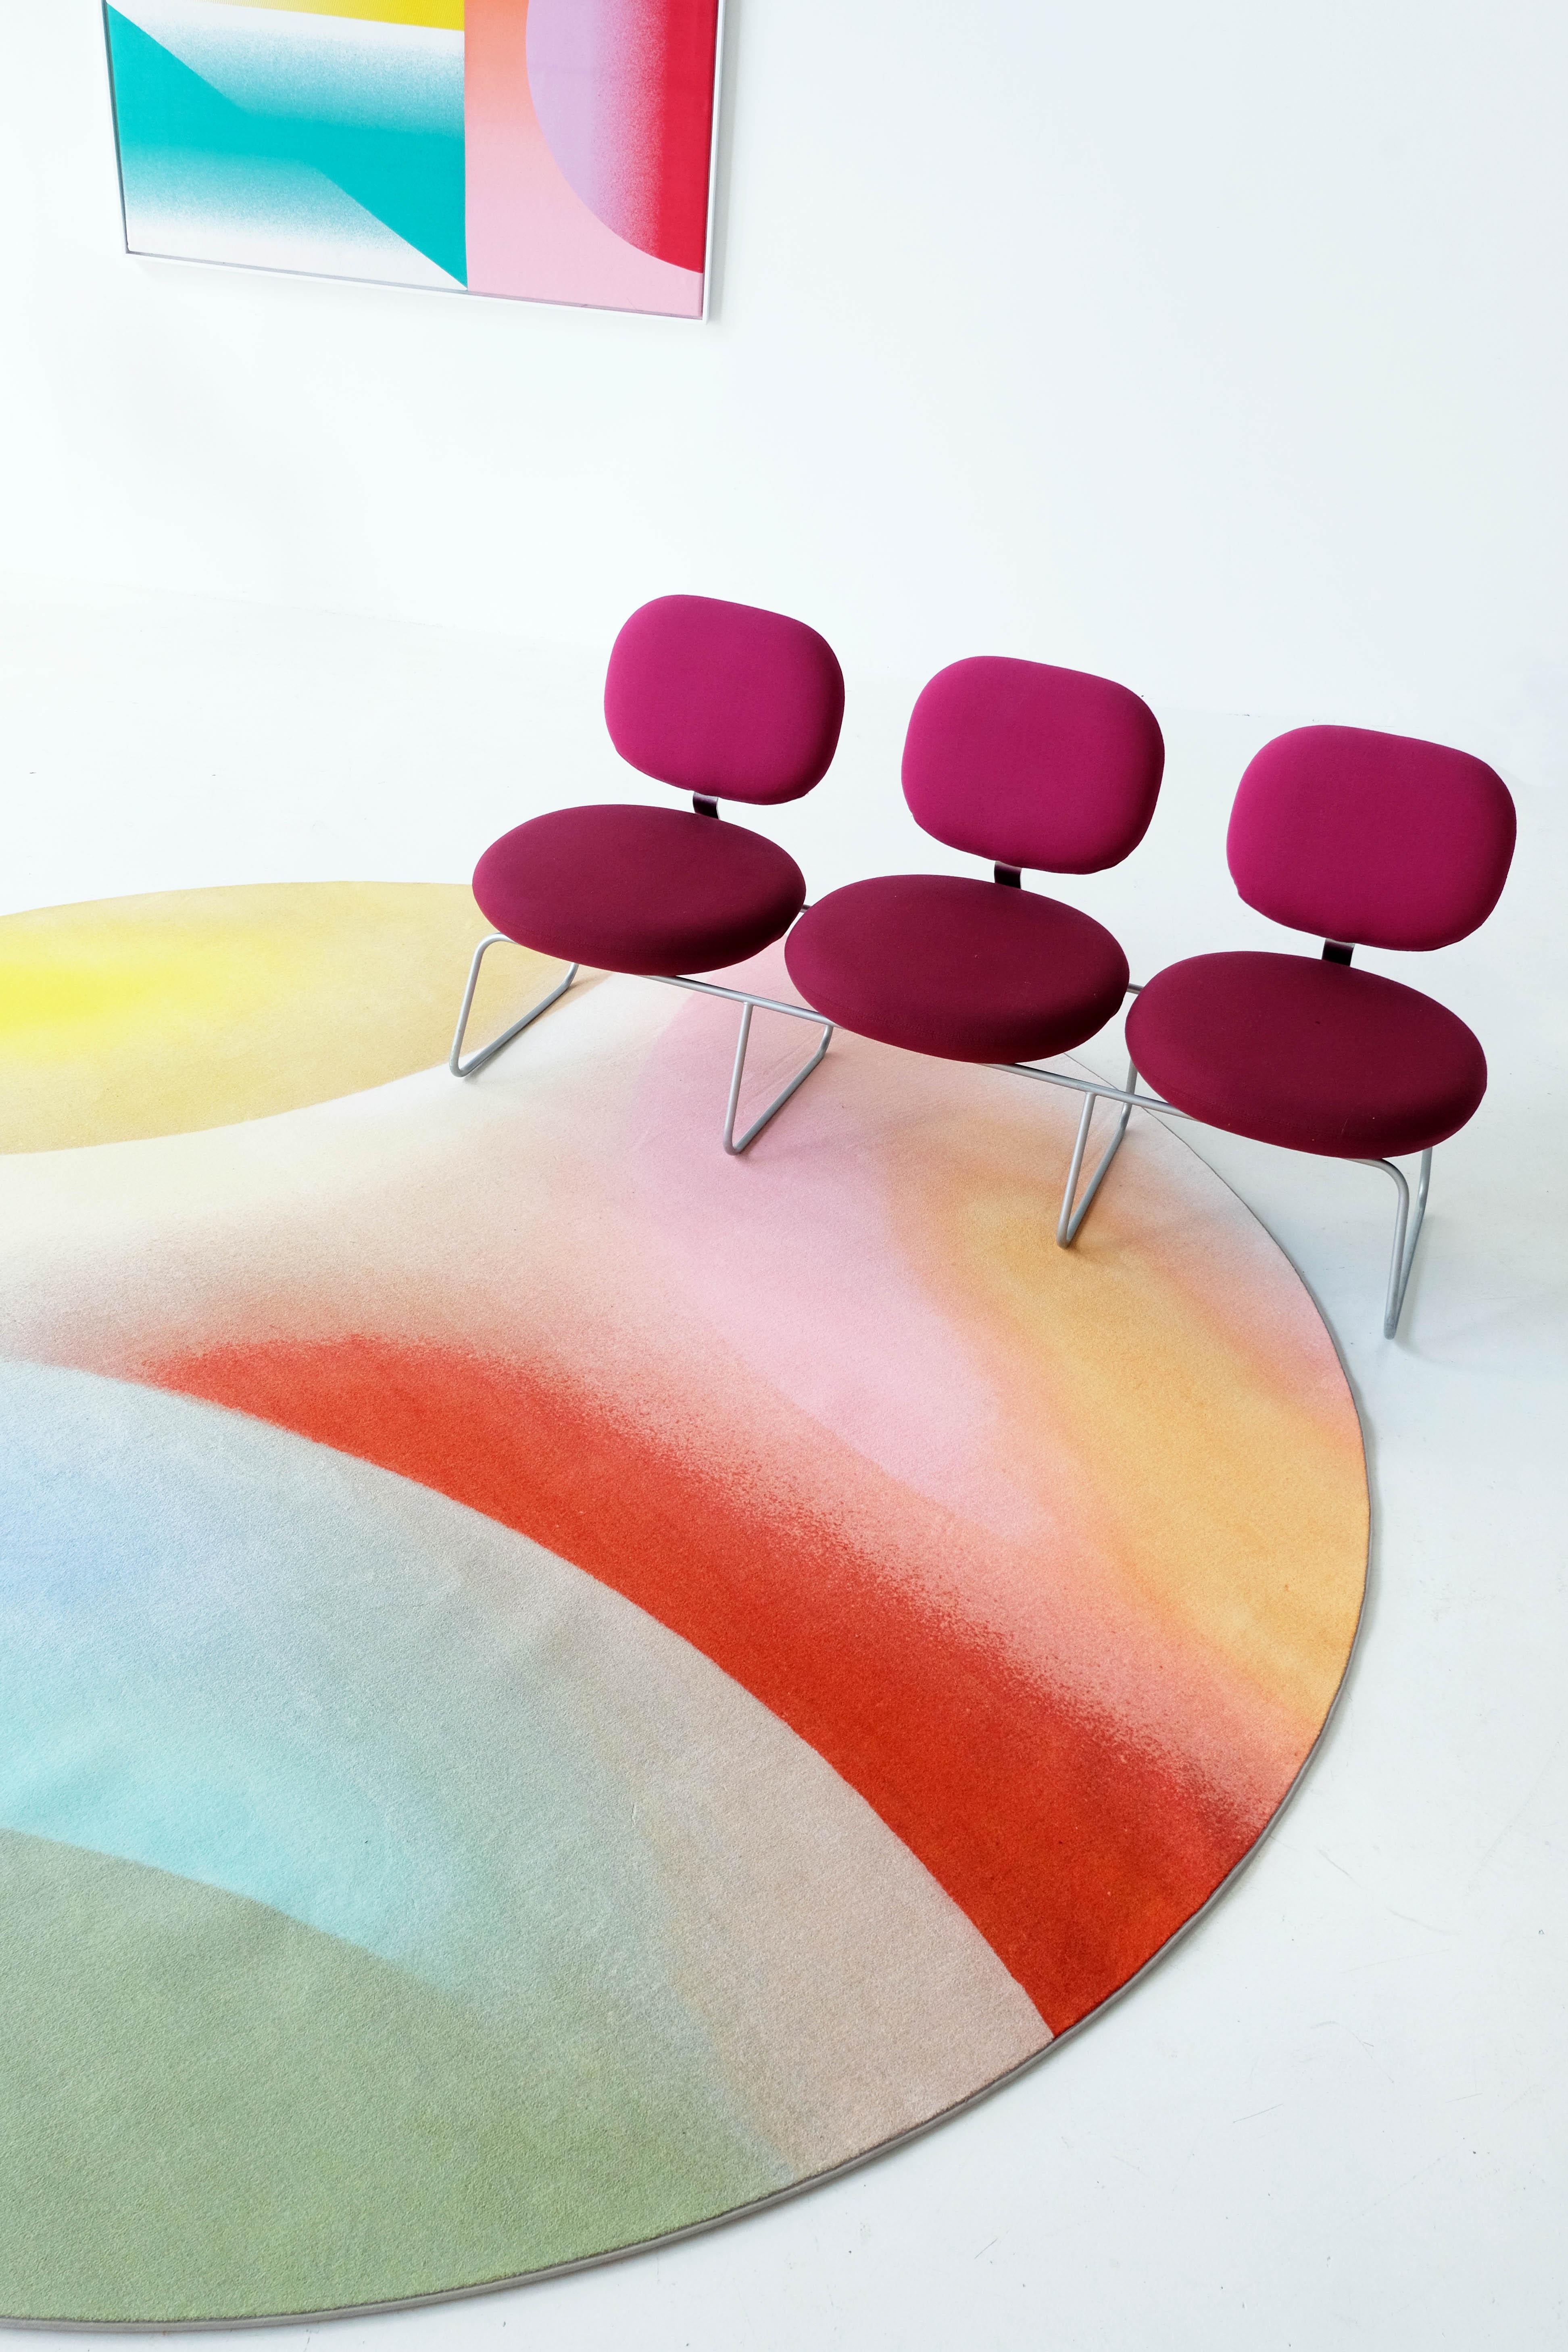 A round carpet featuring vibrant hues inspired by the unique color palettes I encountered in the Atacama Dessert in Chili. I hand-sprayed the entire artwork, combining soft gradients with bold lines in halve circles, creating intriguing new worlds.